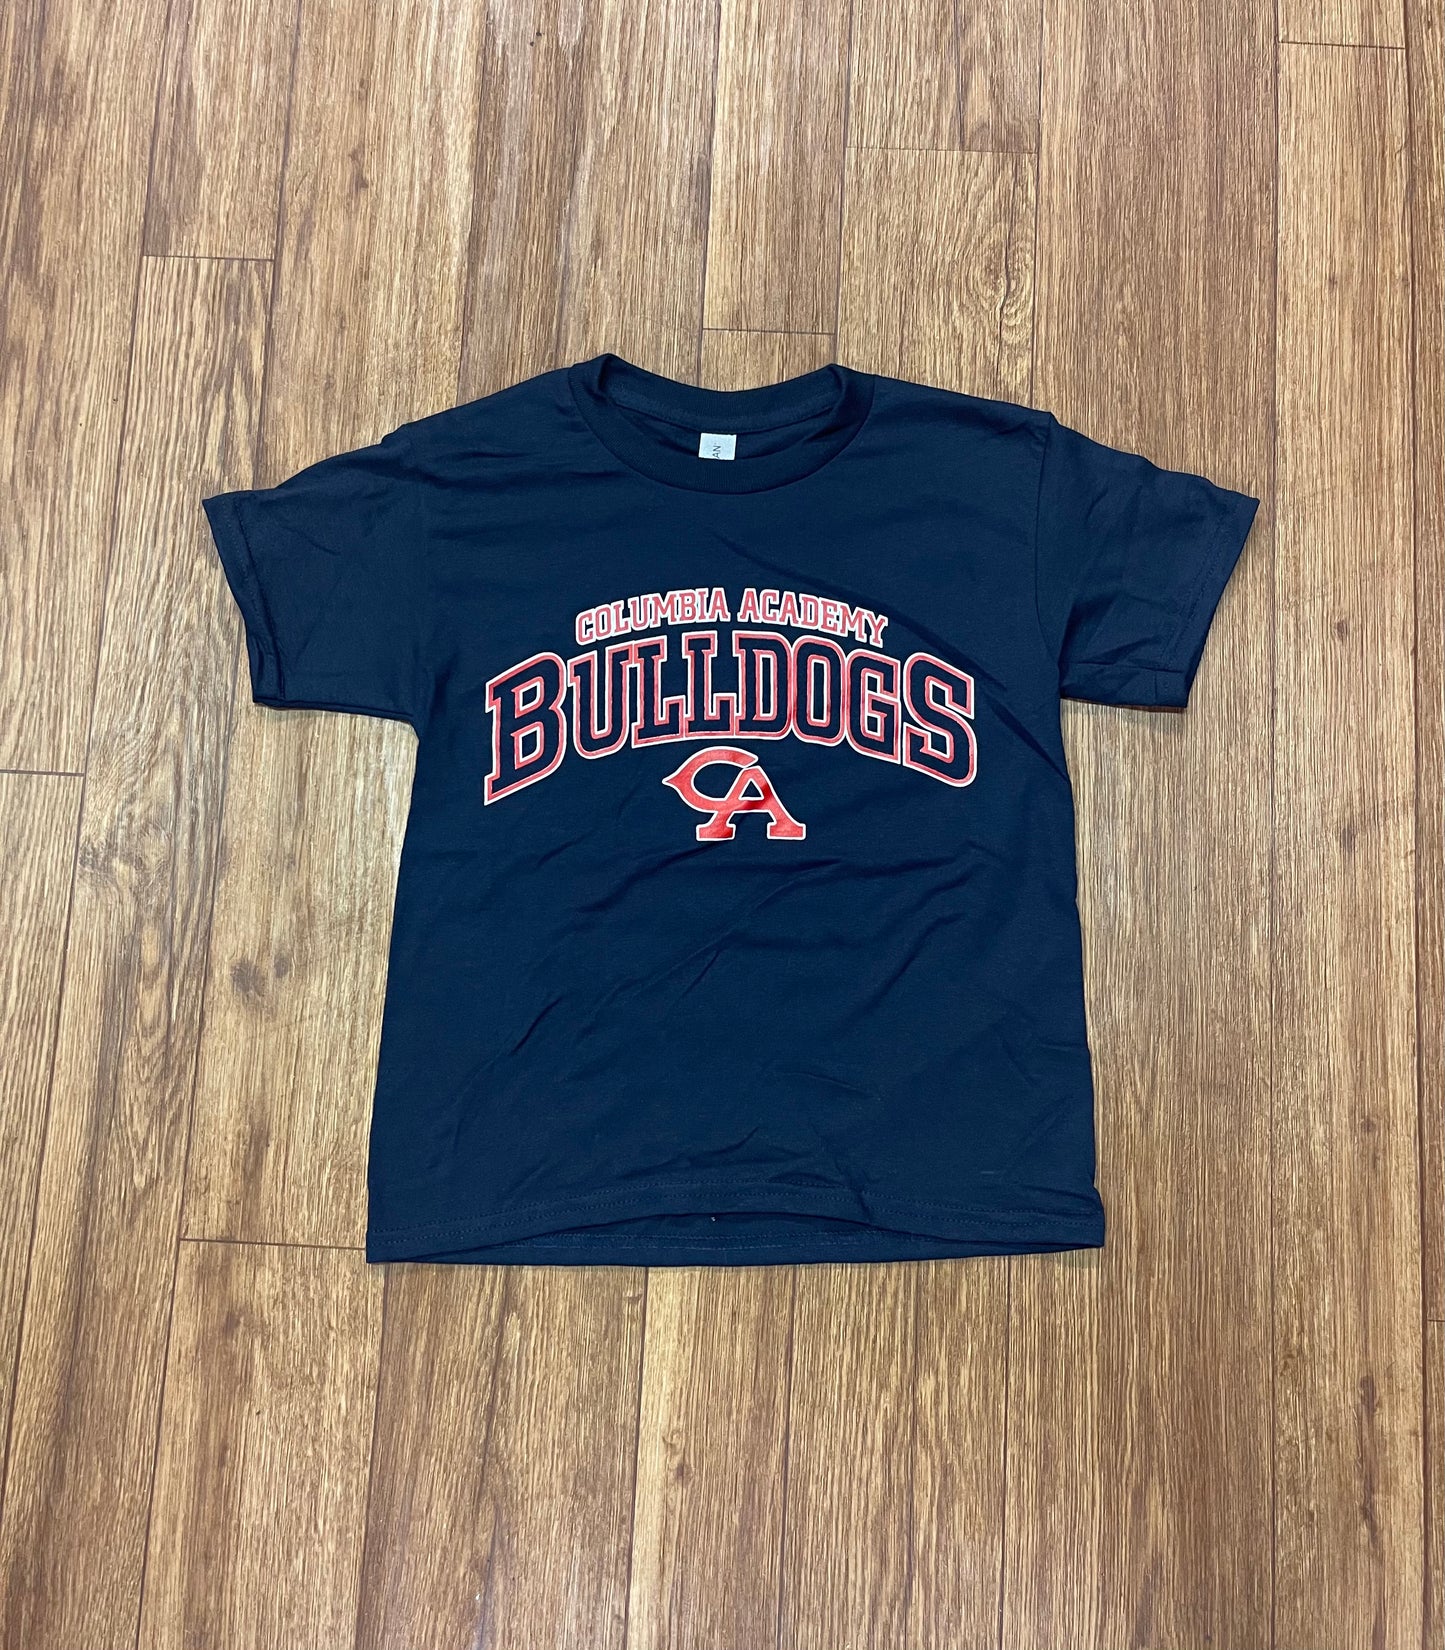 Clearance Columbia Academy T-Shirt